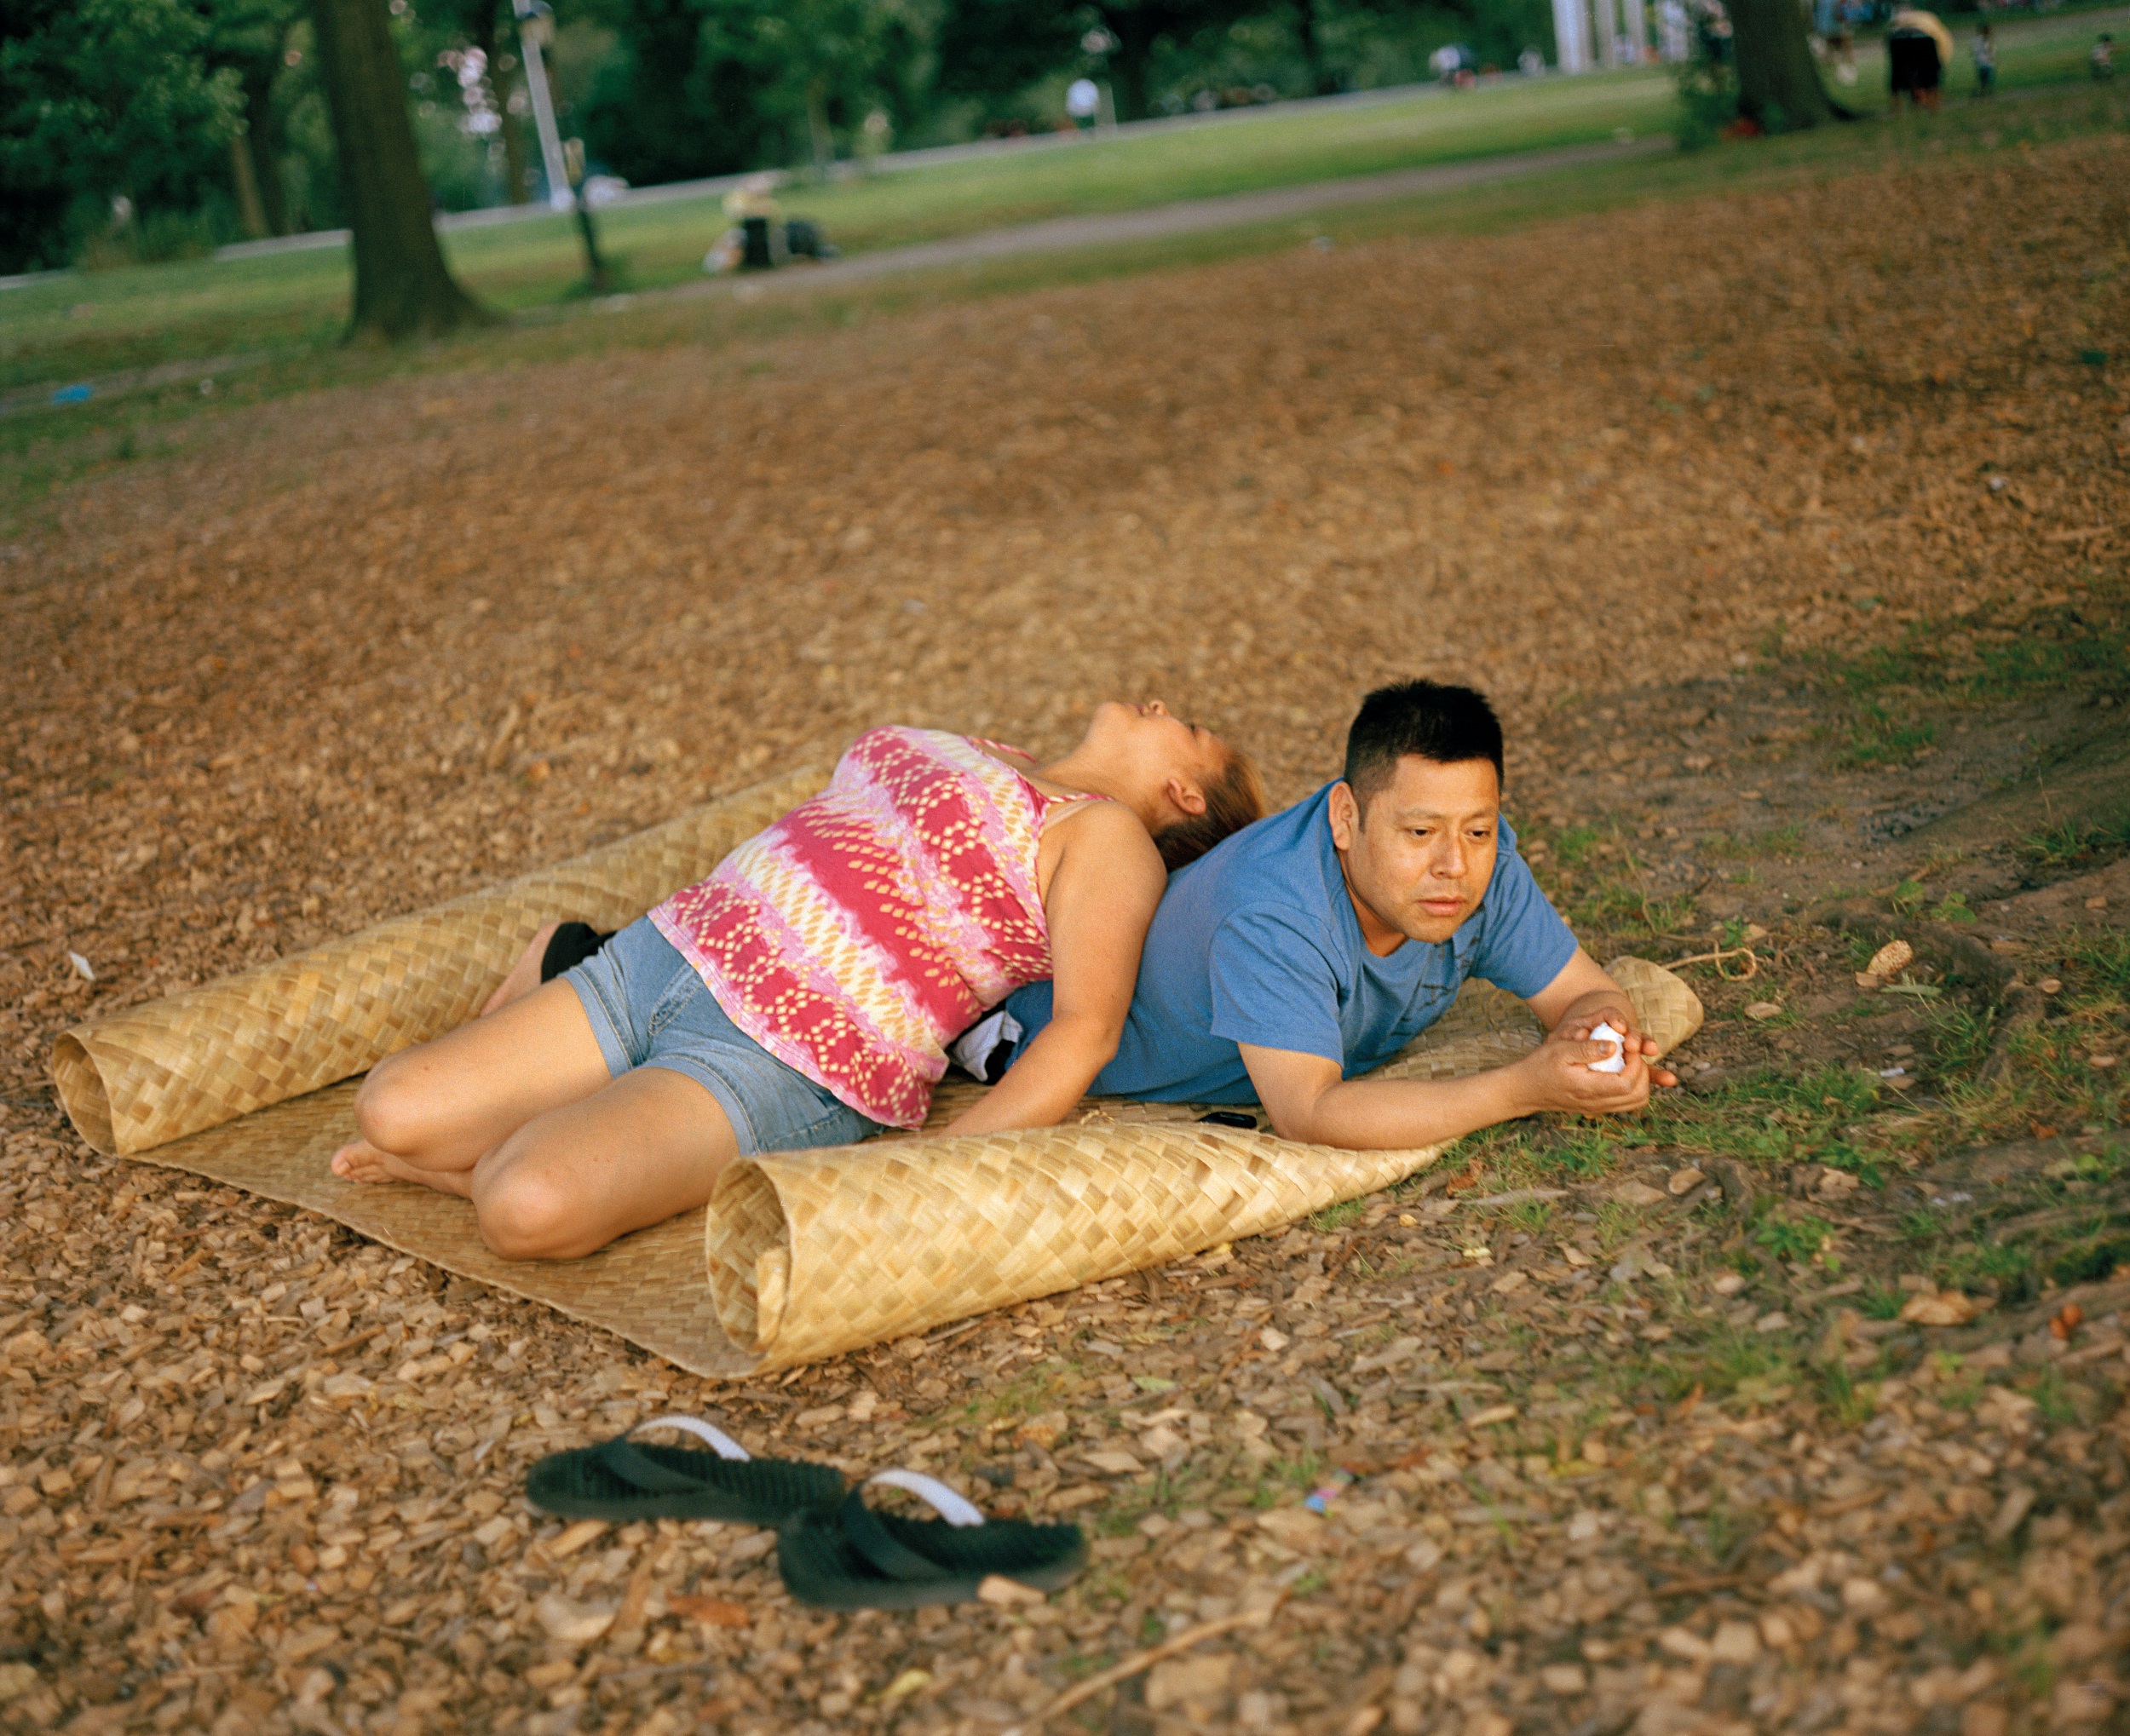 Color photograph of a man and a woman lyinig on a woven mat in a park. The woman is lying on top of the man and her legs are folded underneath her; her flip flops are in front.